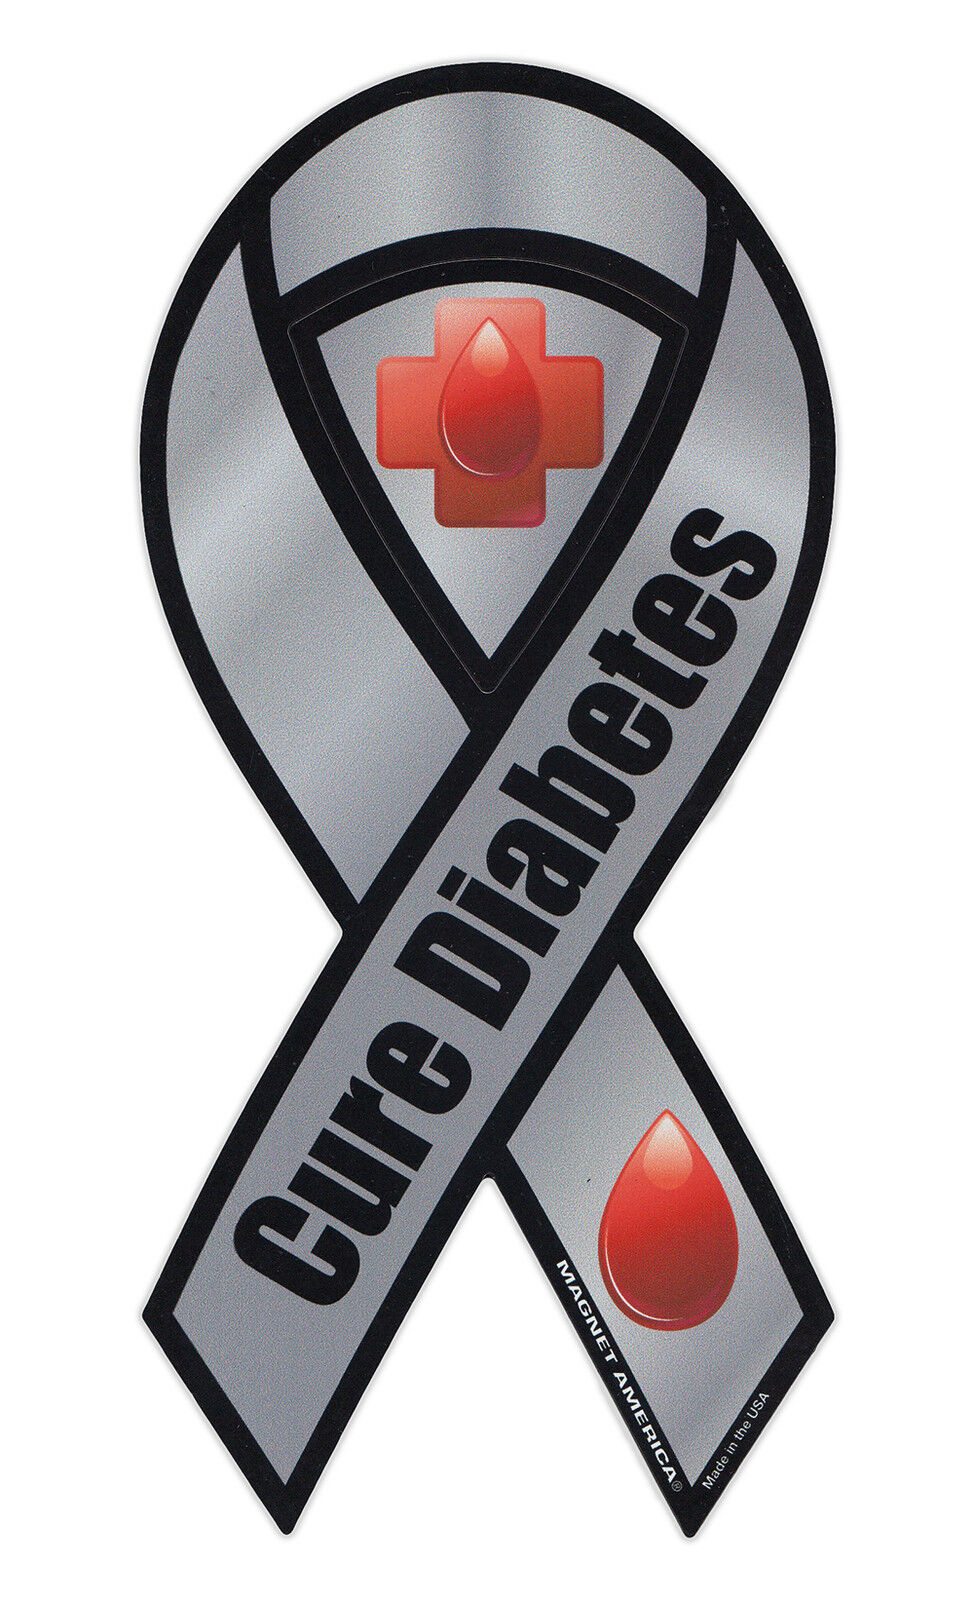 Magnetic Bumper Sticker - Diabetes Awareness - Ribbon Shaped Support Magnet